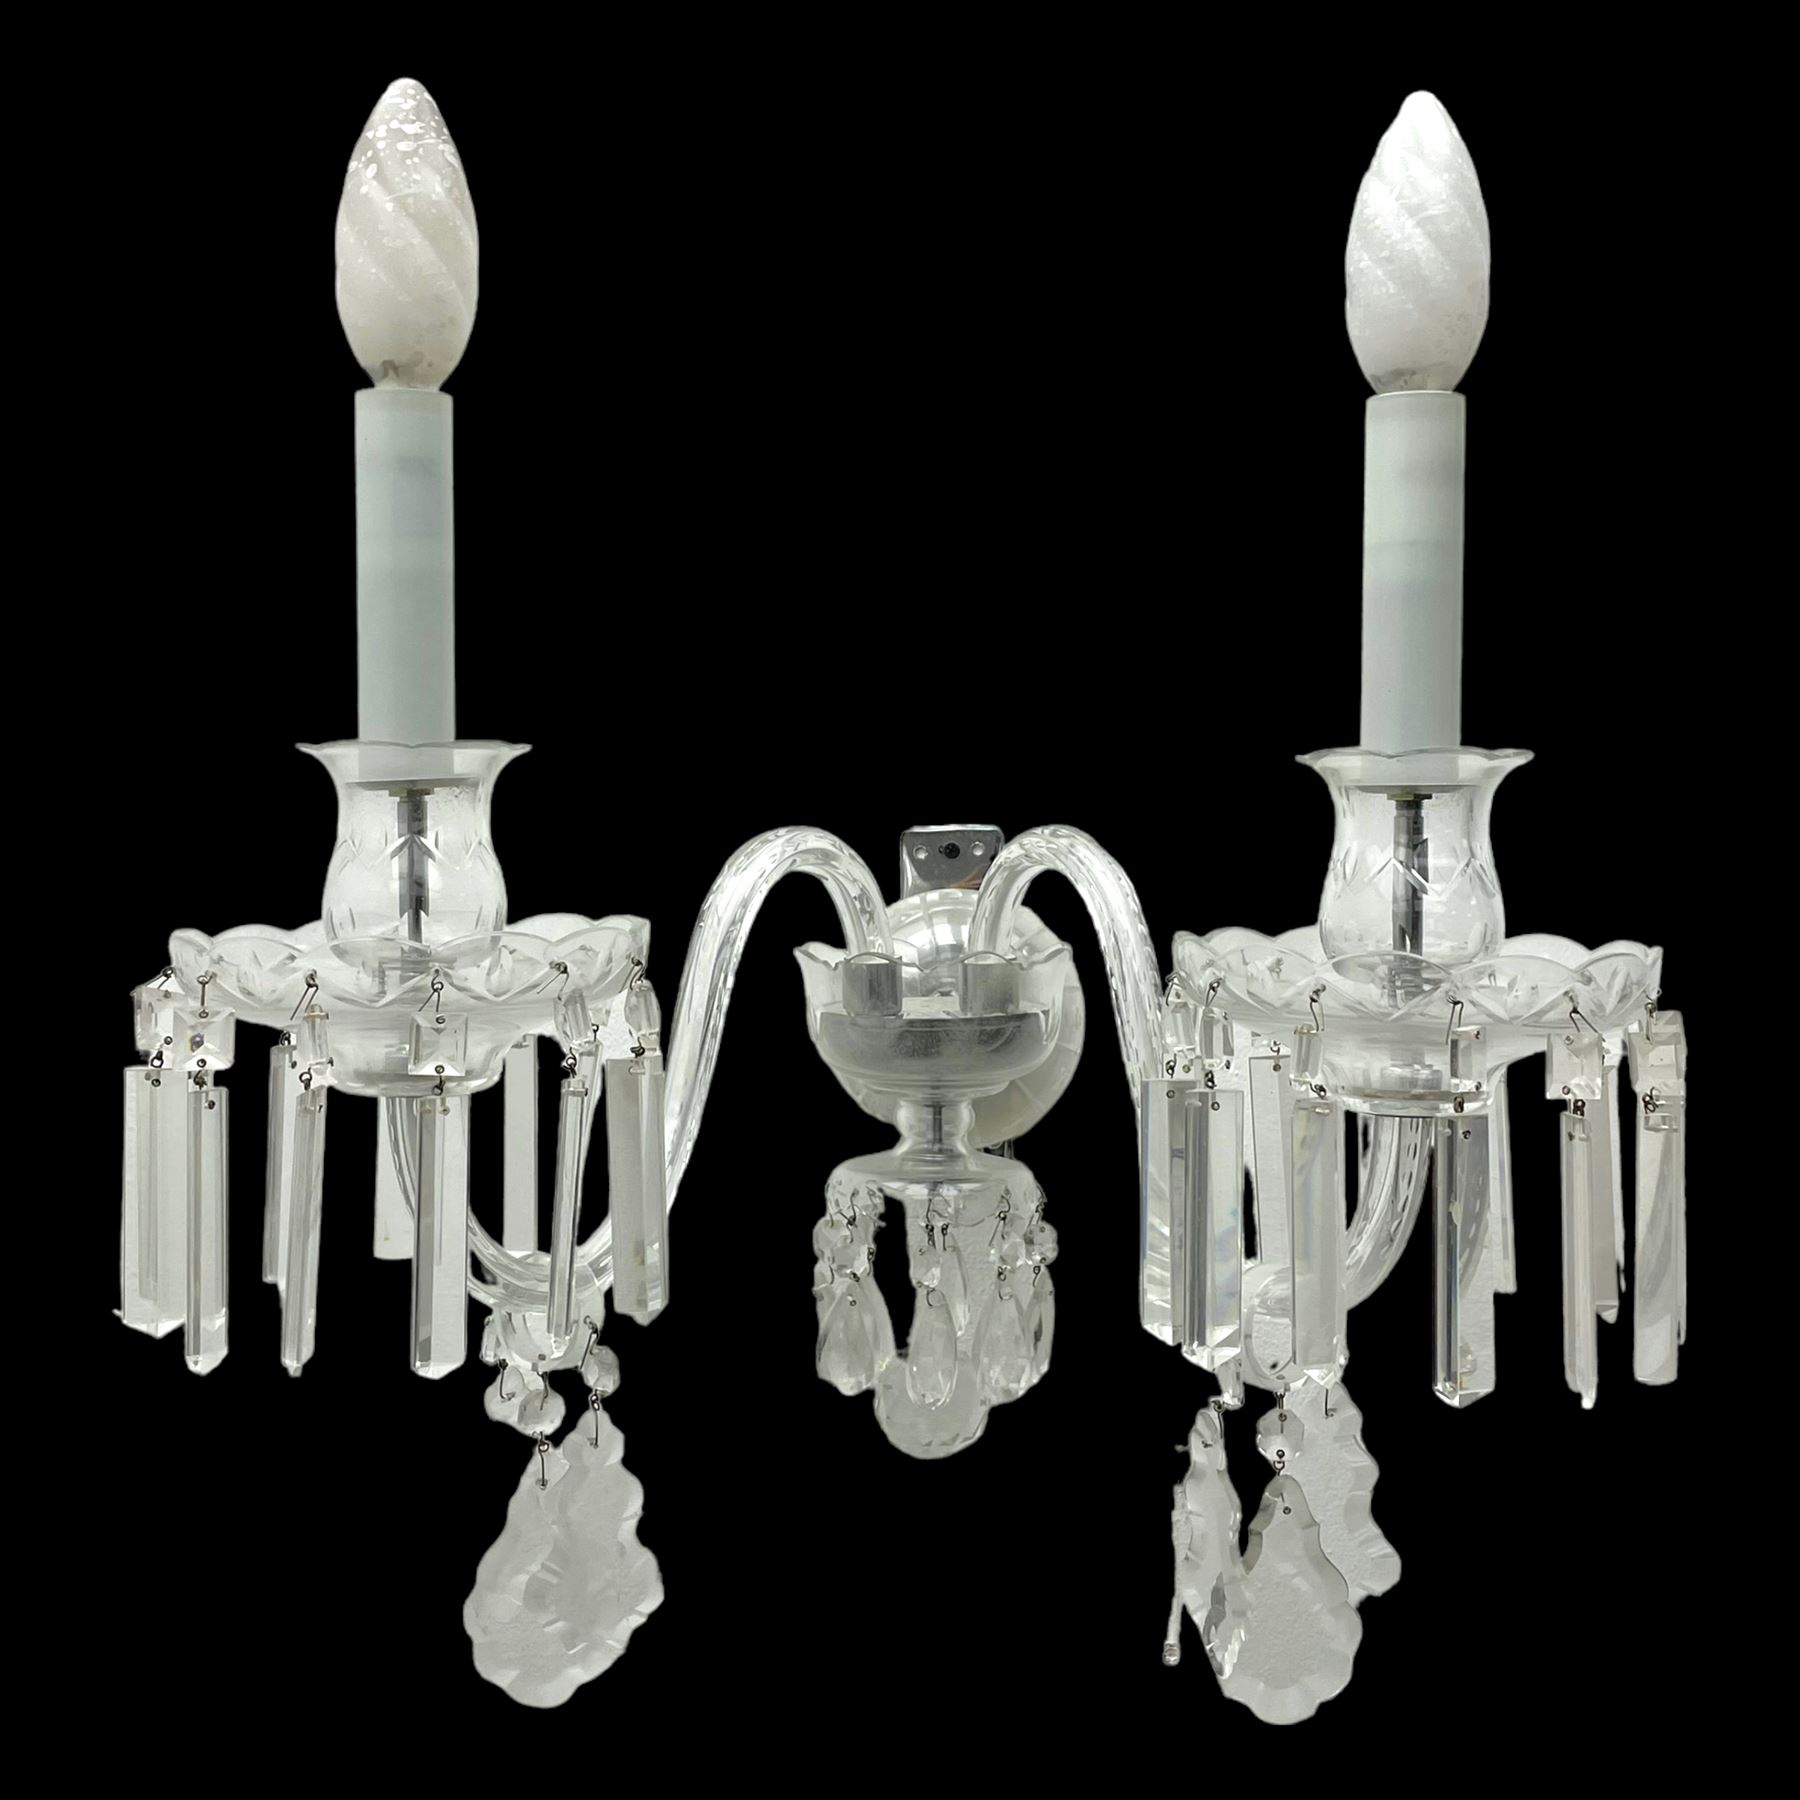 Pair of cut glass two branch wall sconce candelabras - Image 3 of 10